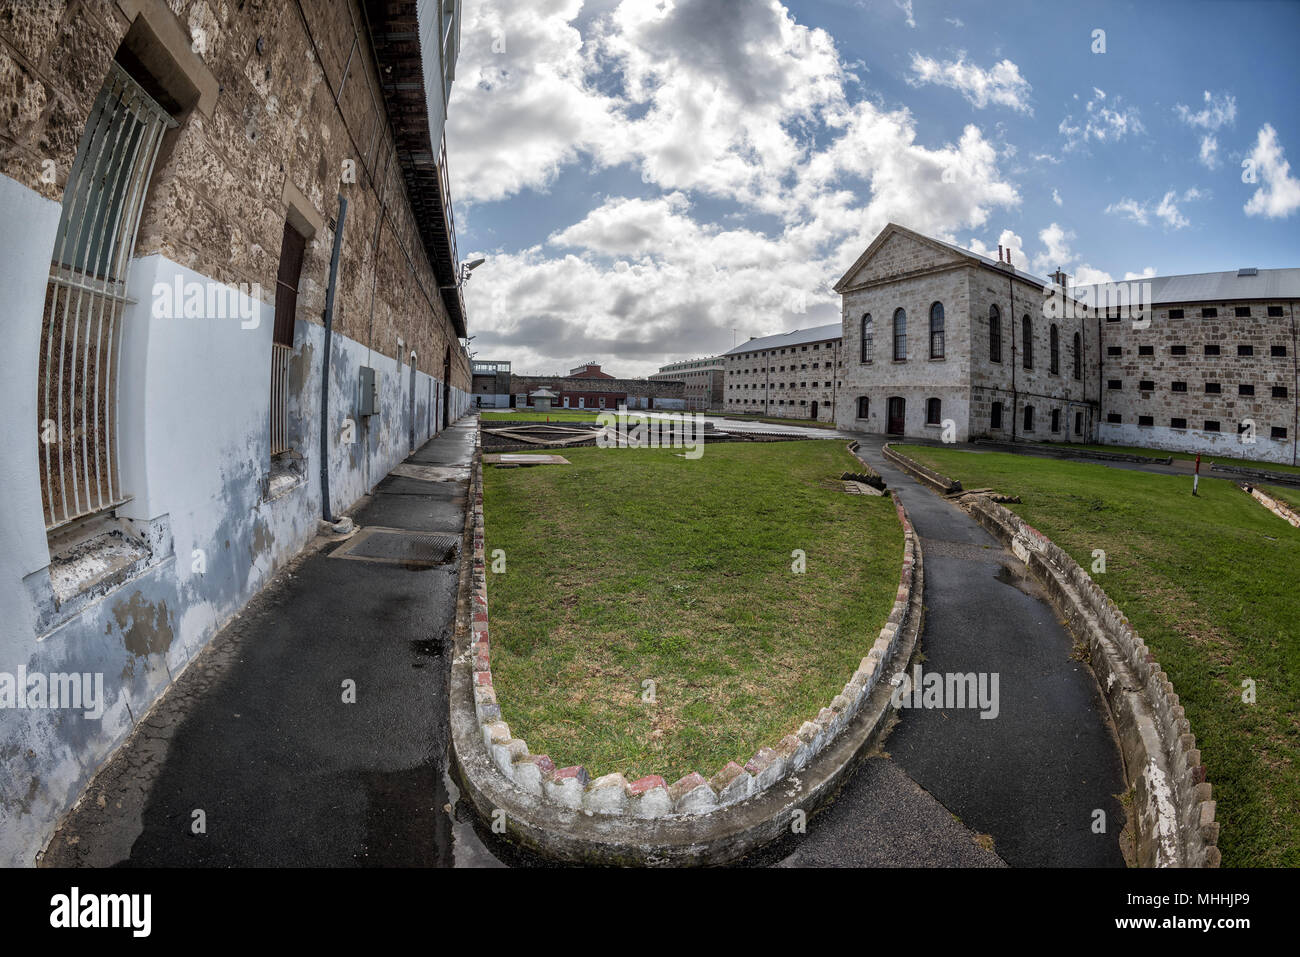 PERTH - AUSTRALIA - AUGUST, 20 2015 - Fremantle Prison was constructed as a prison for convicts and more than 50 people were hanged inside the buildin Stock Photo